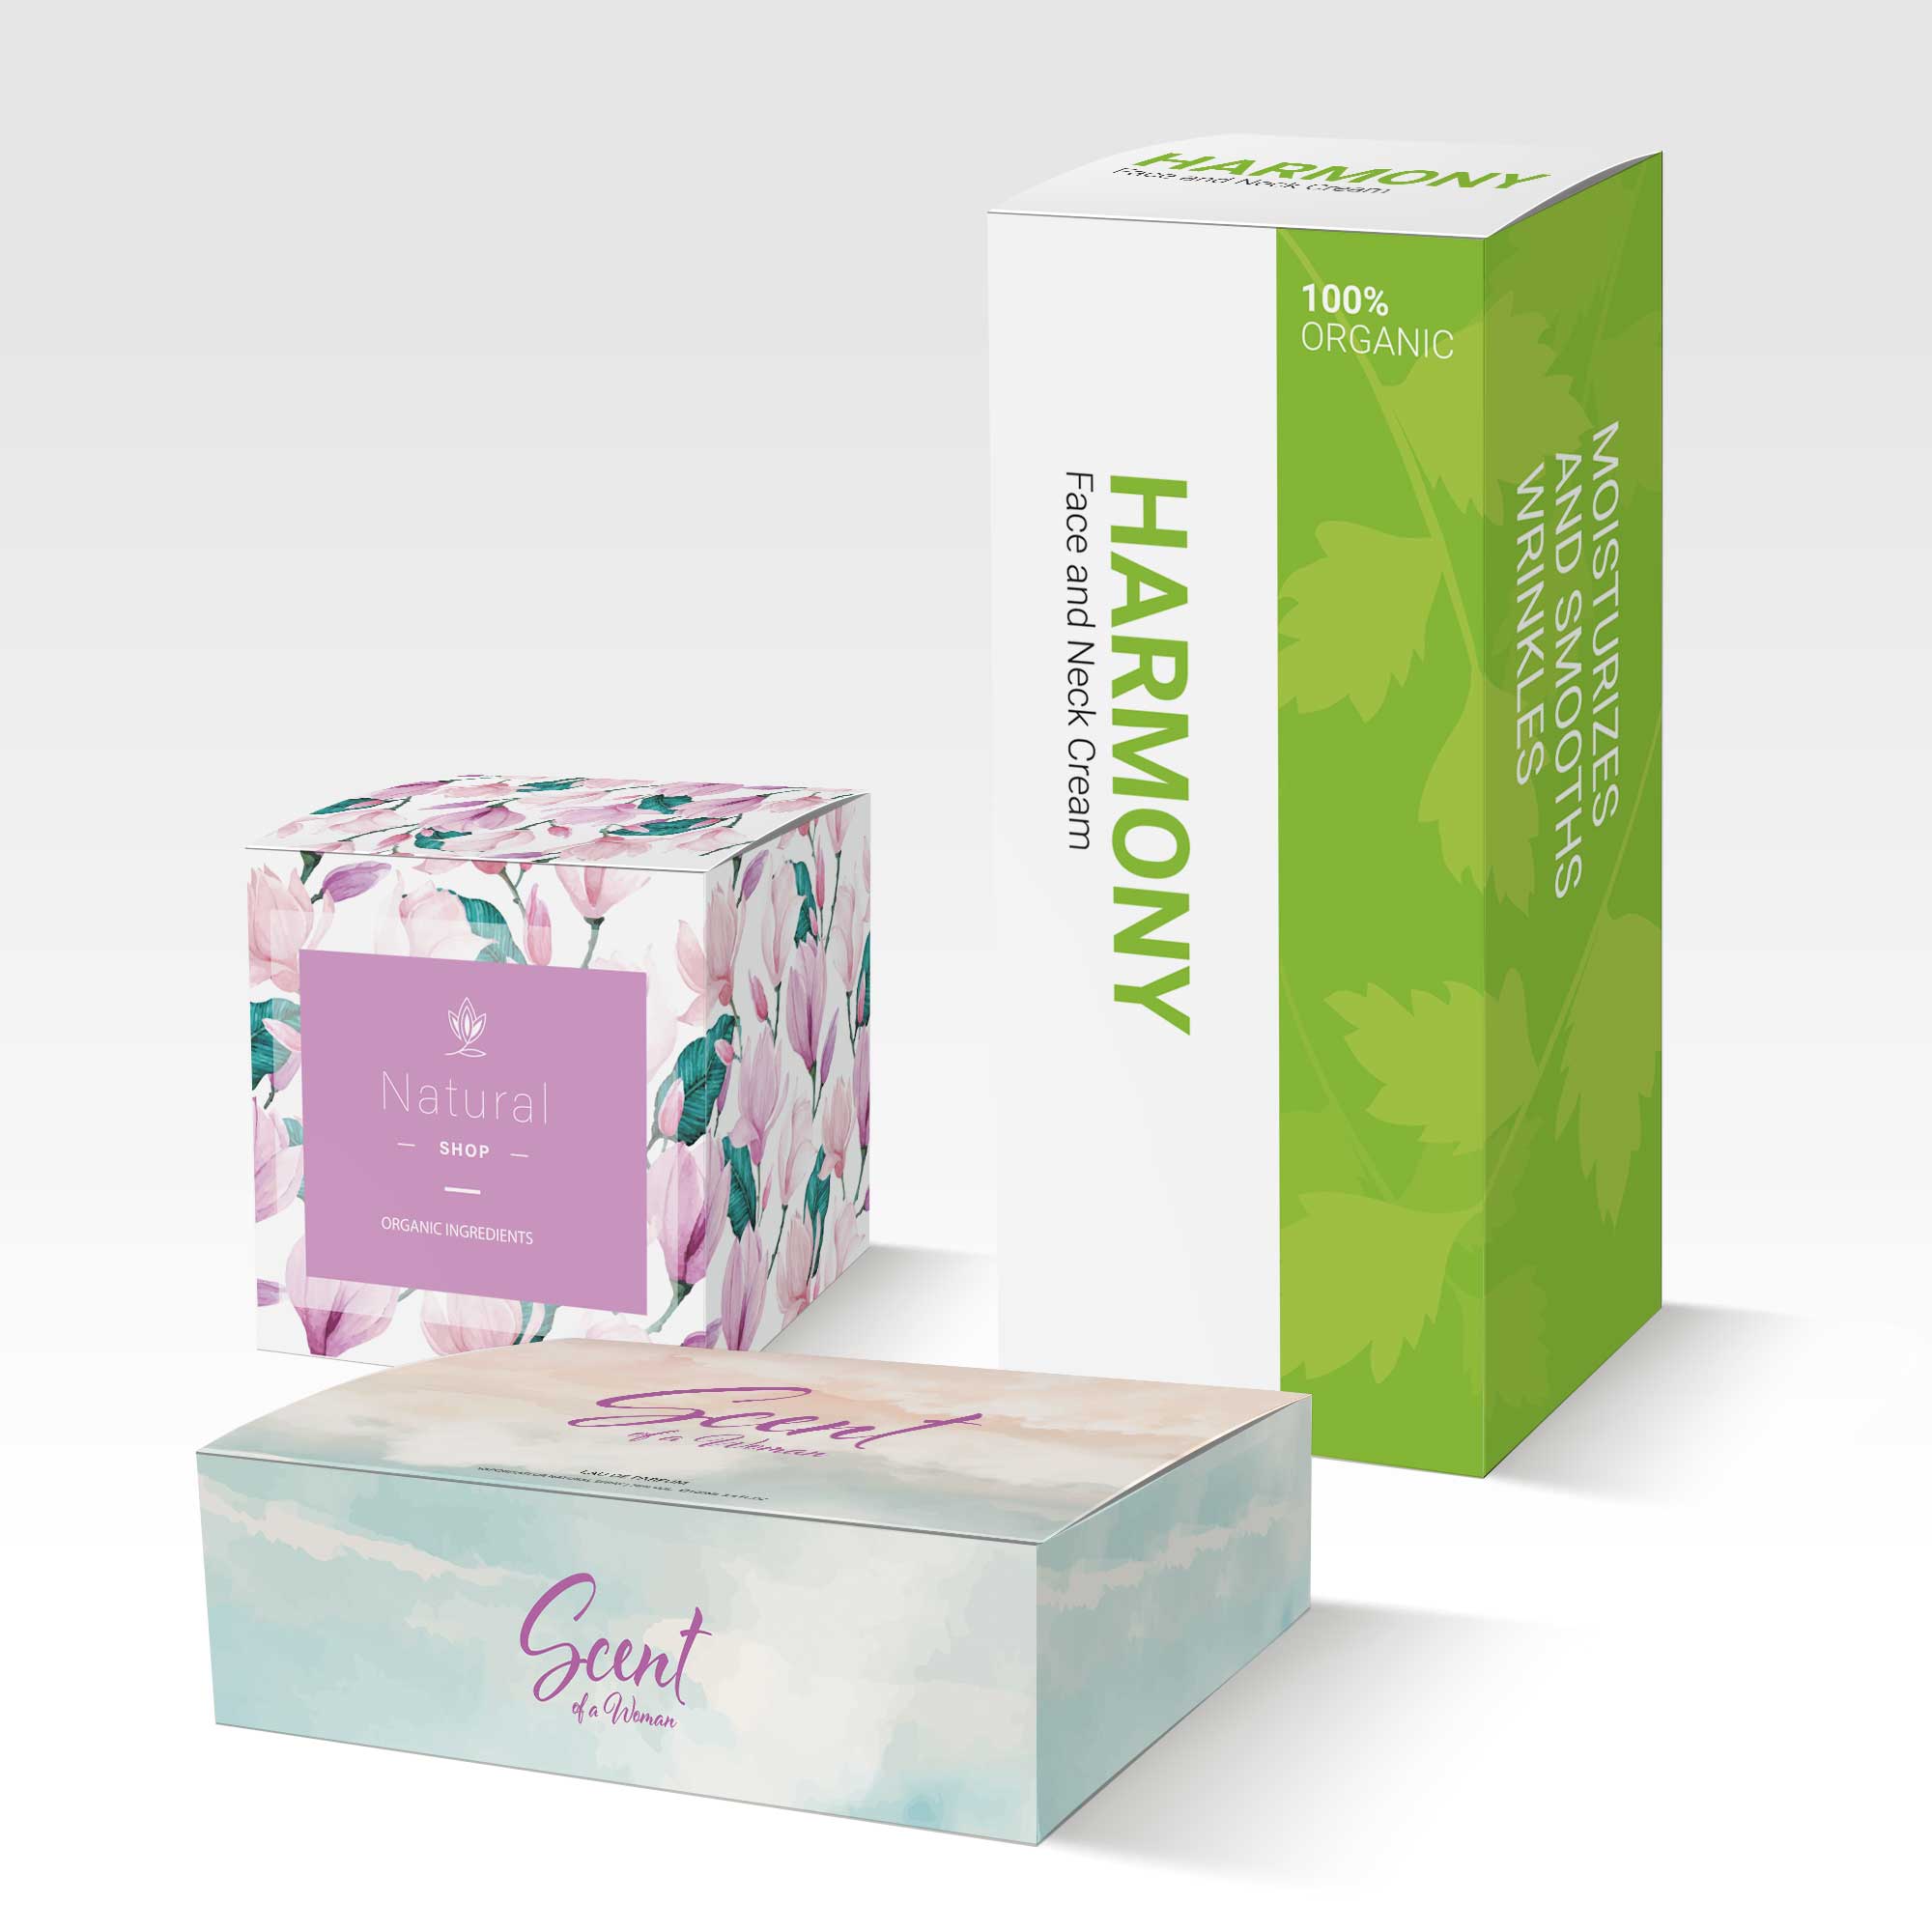 Product packaging boxes